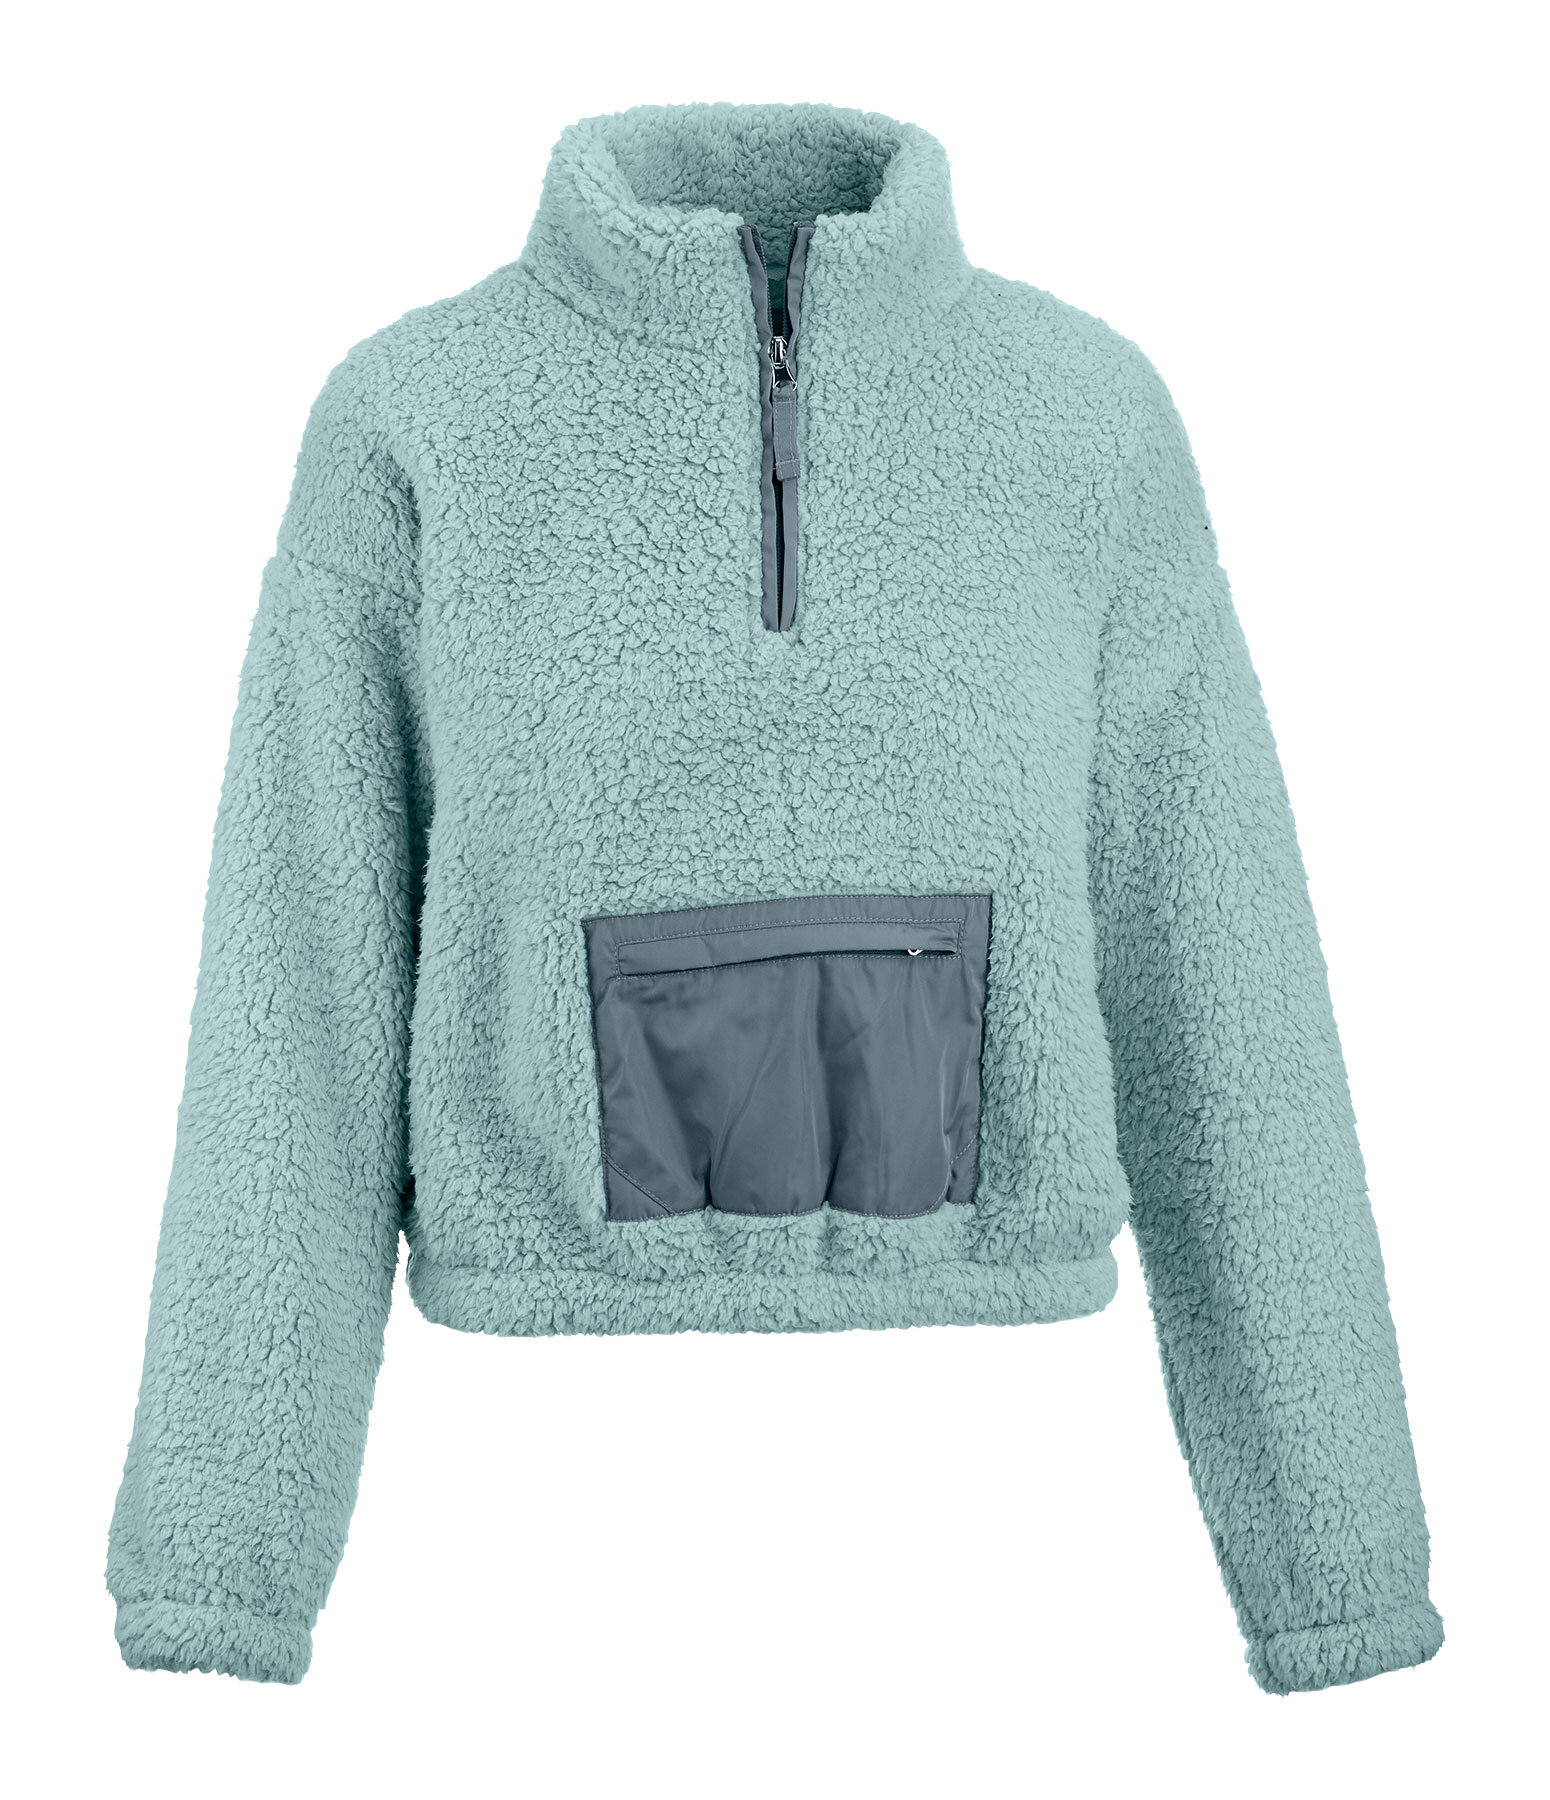 Pull sherpa pour femmes   Icy